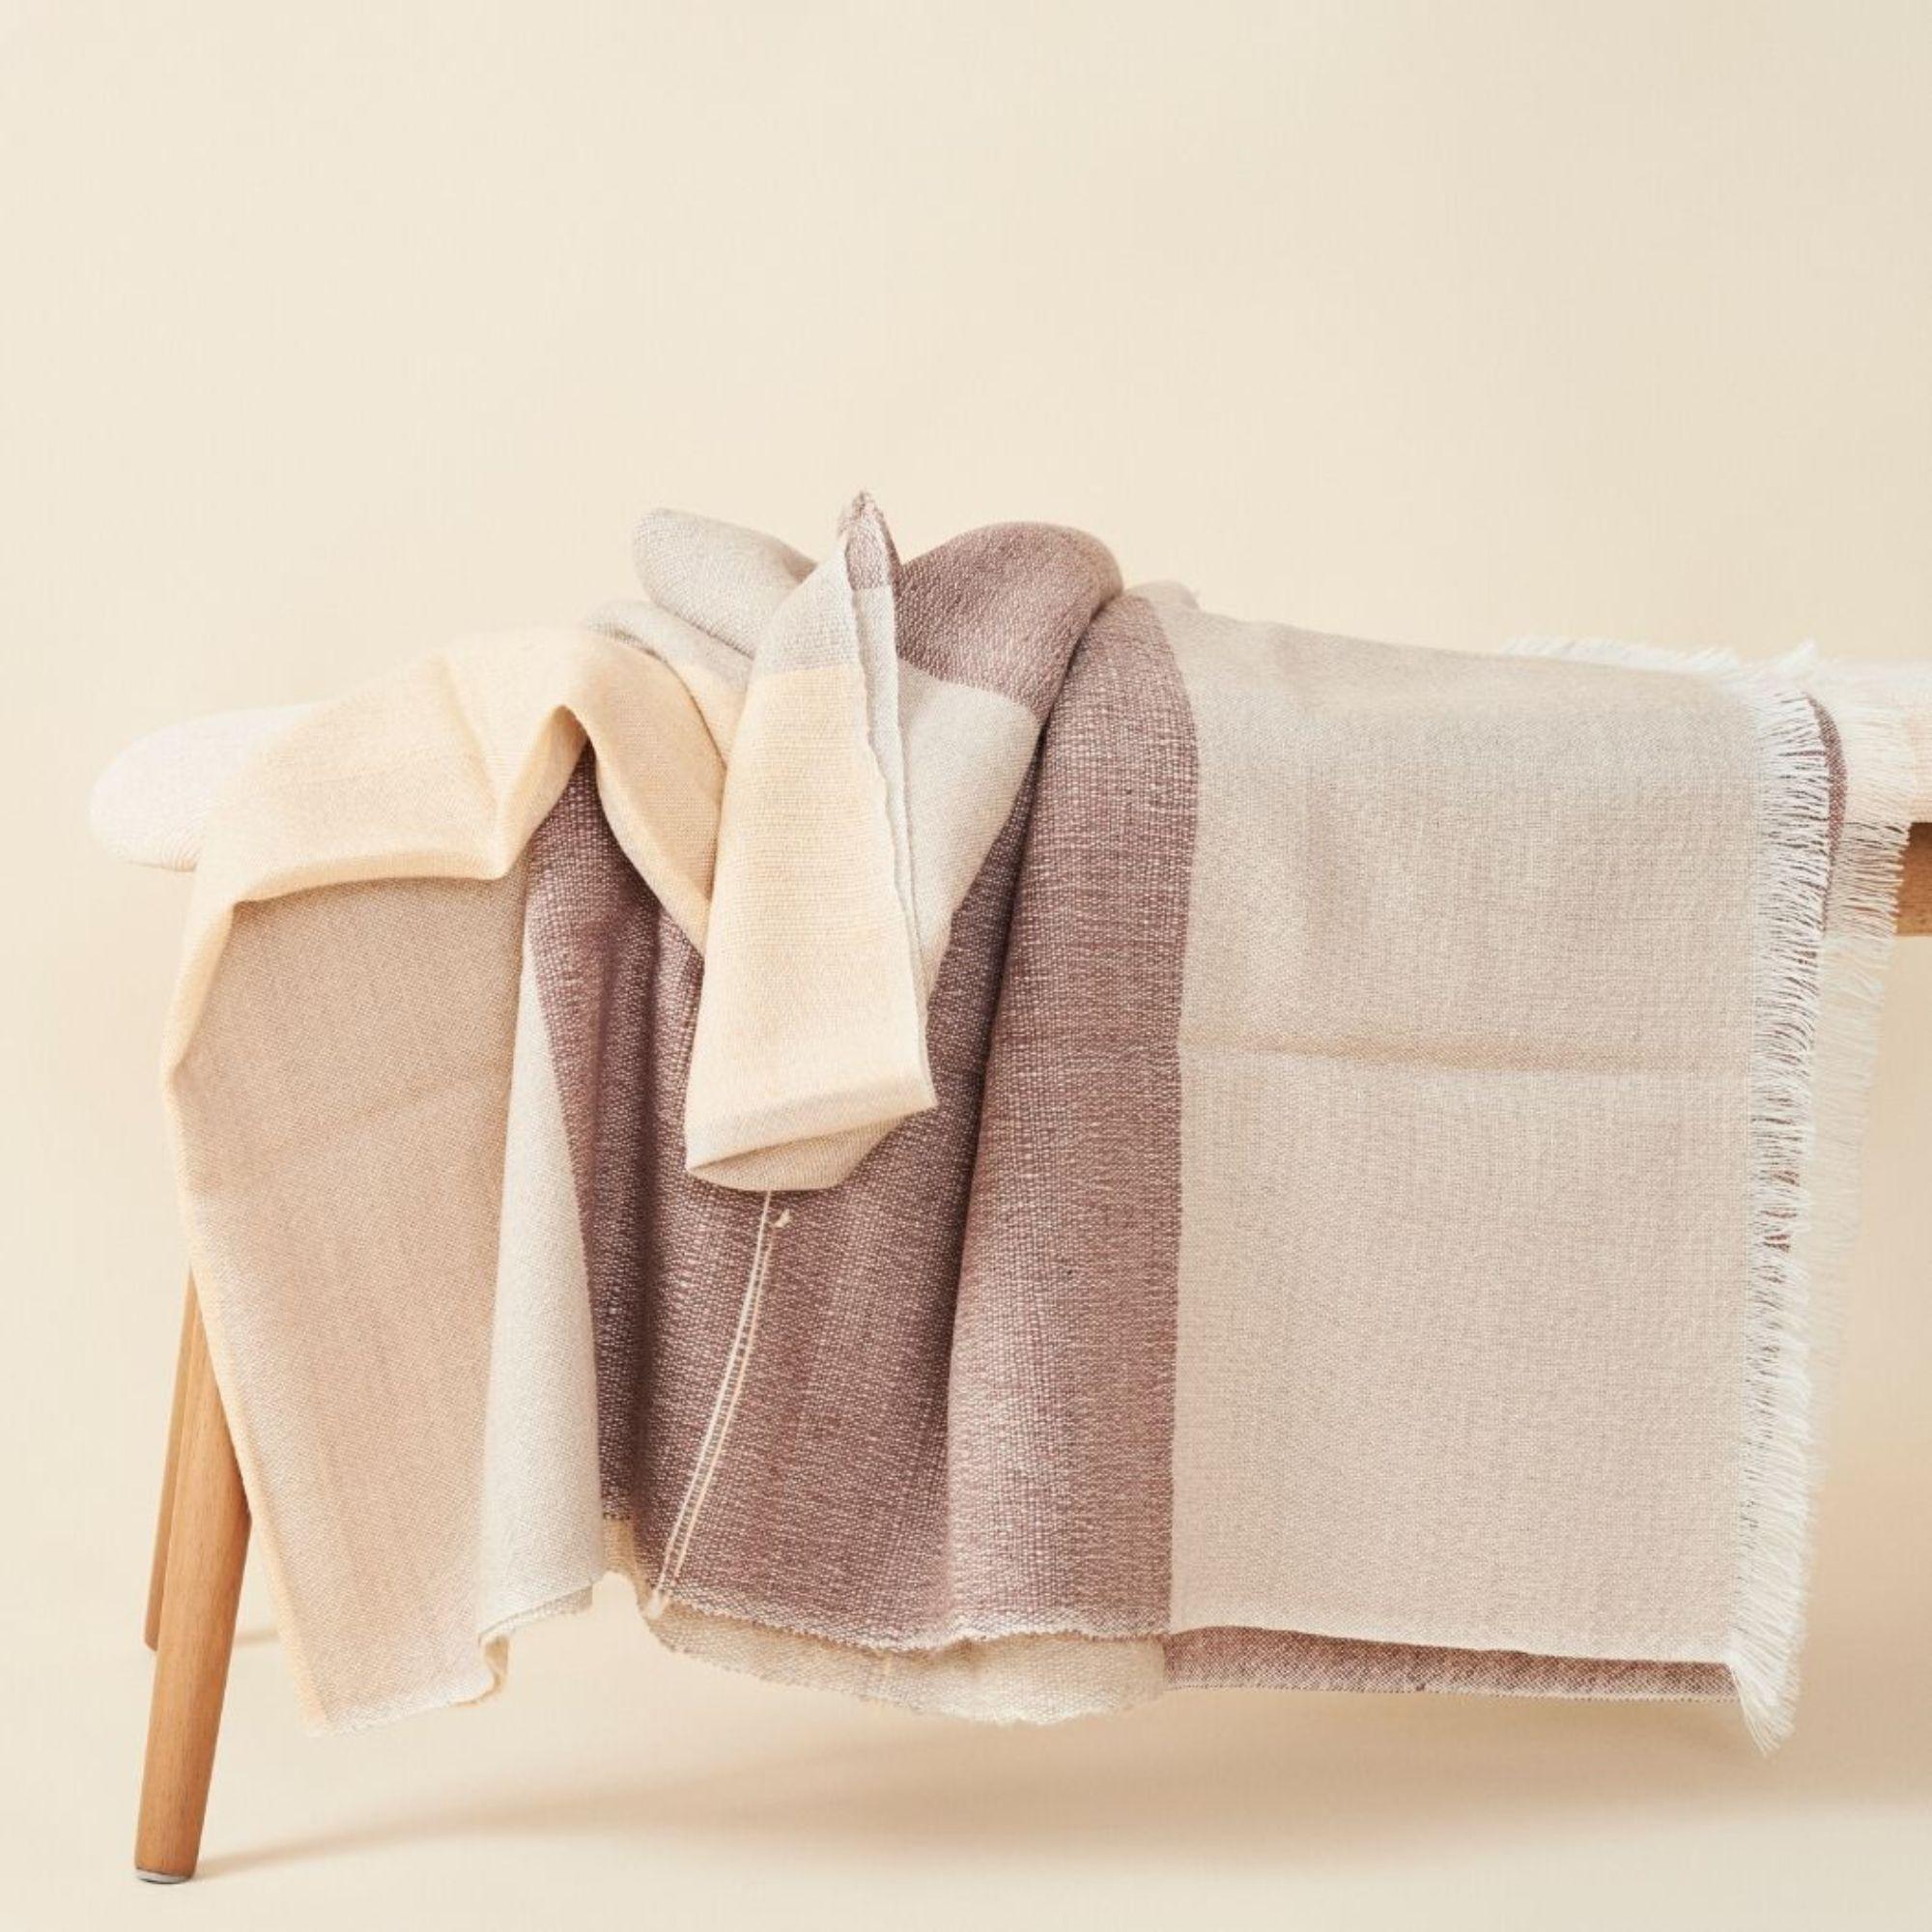 Hand-woven with attention to detail and finishing, Cino throw / blanket luxuriously combines heritage value and high-quality craftsmanship.  The design, made of premium merino, features color block panels in neutral shades of cream, beige, and